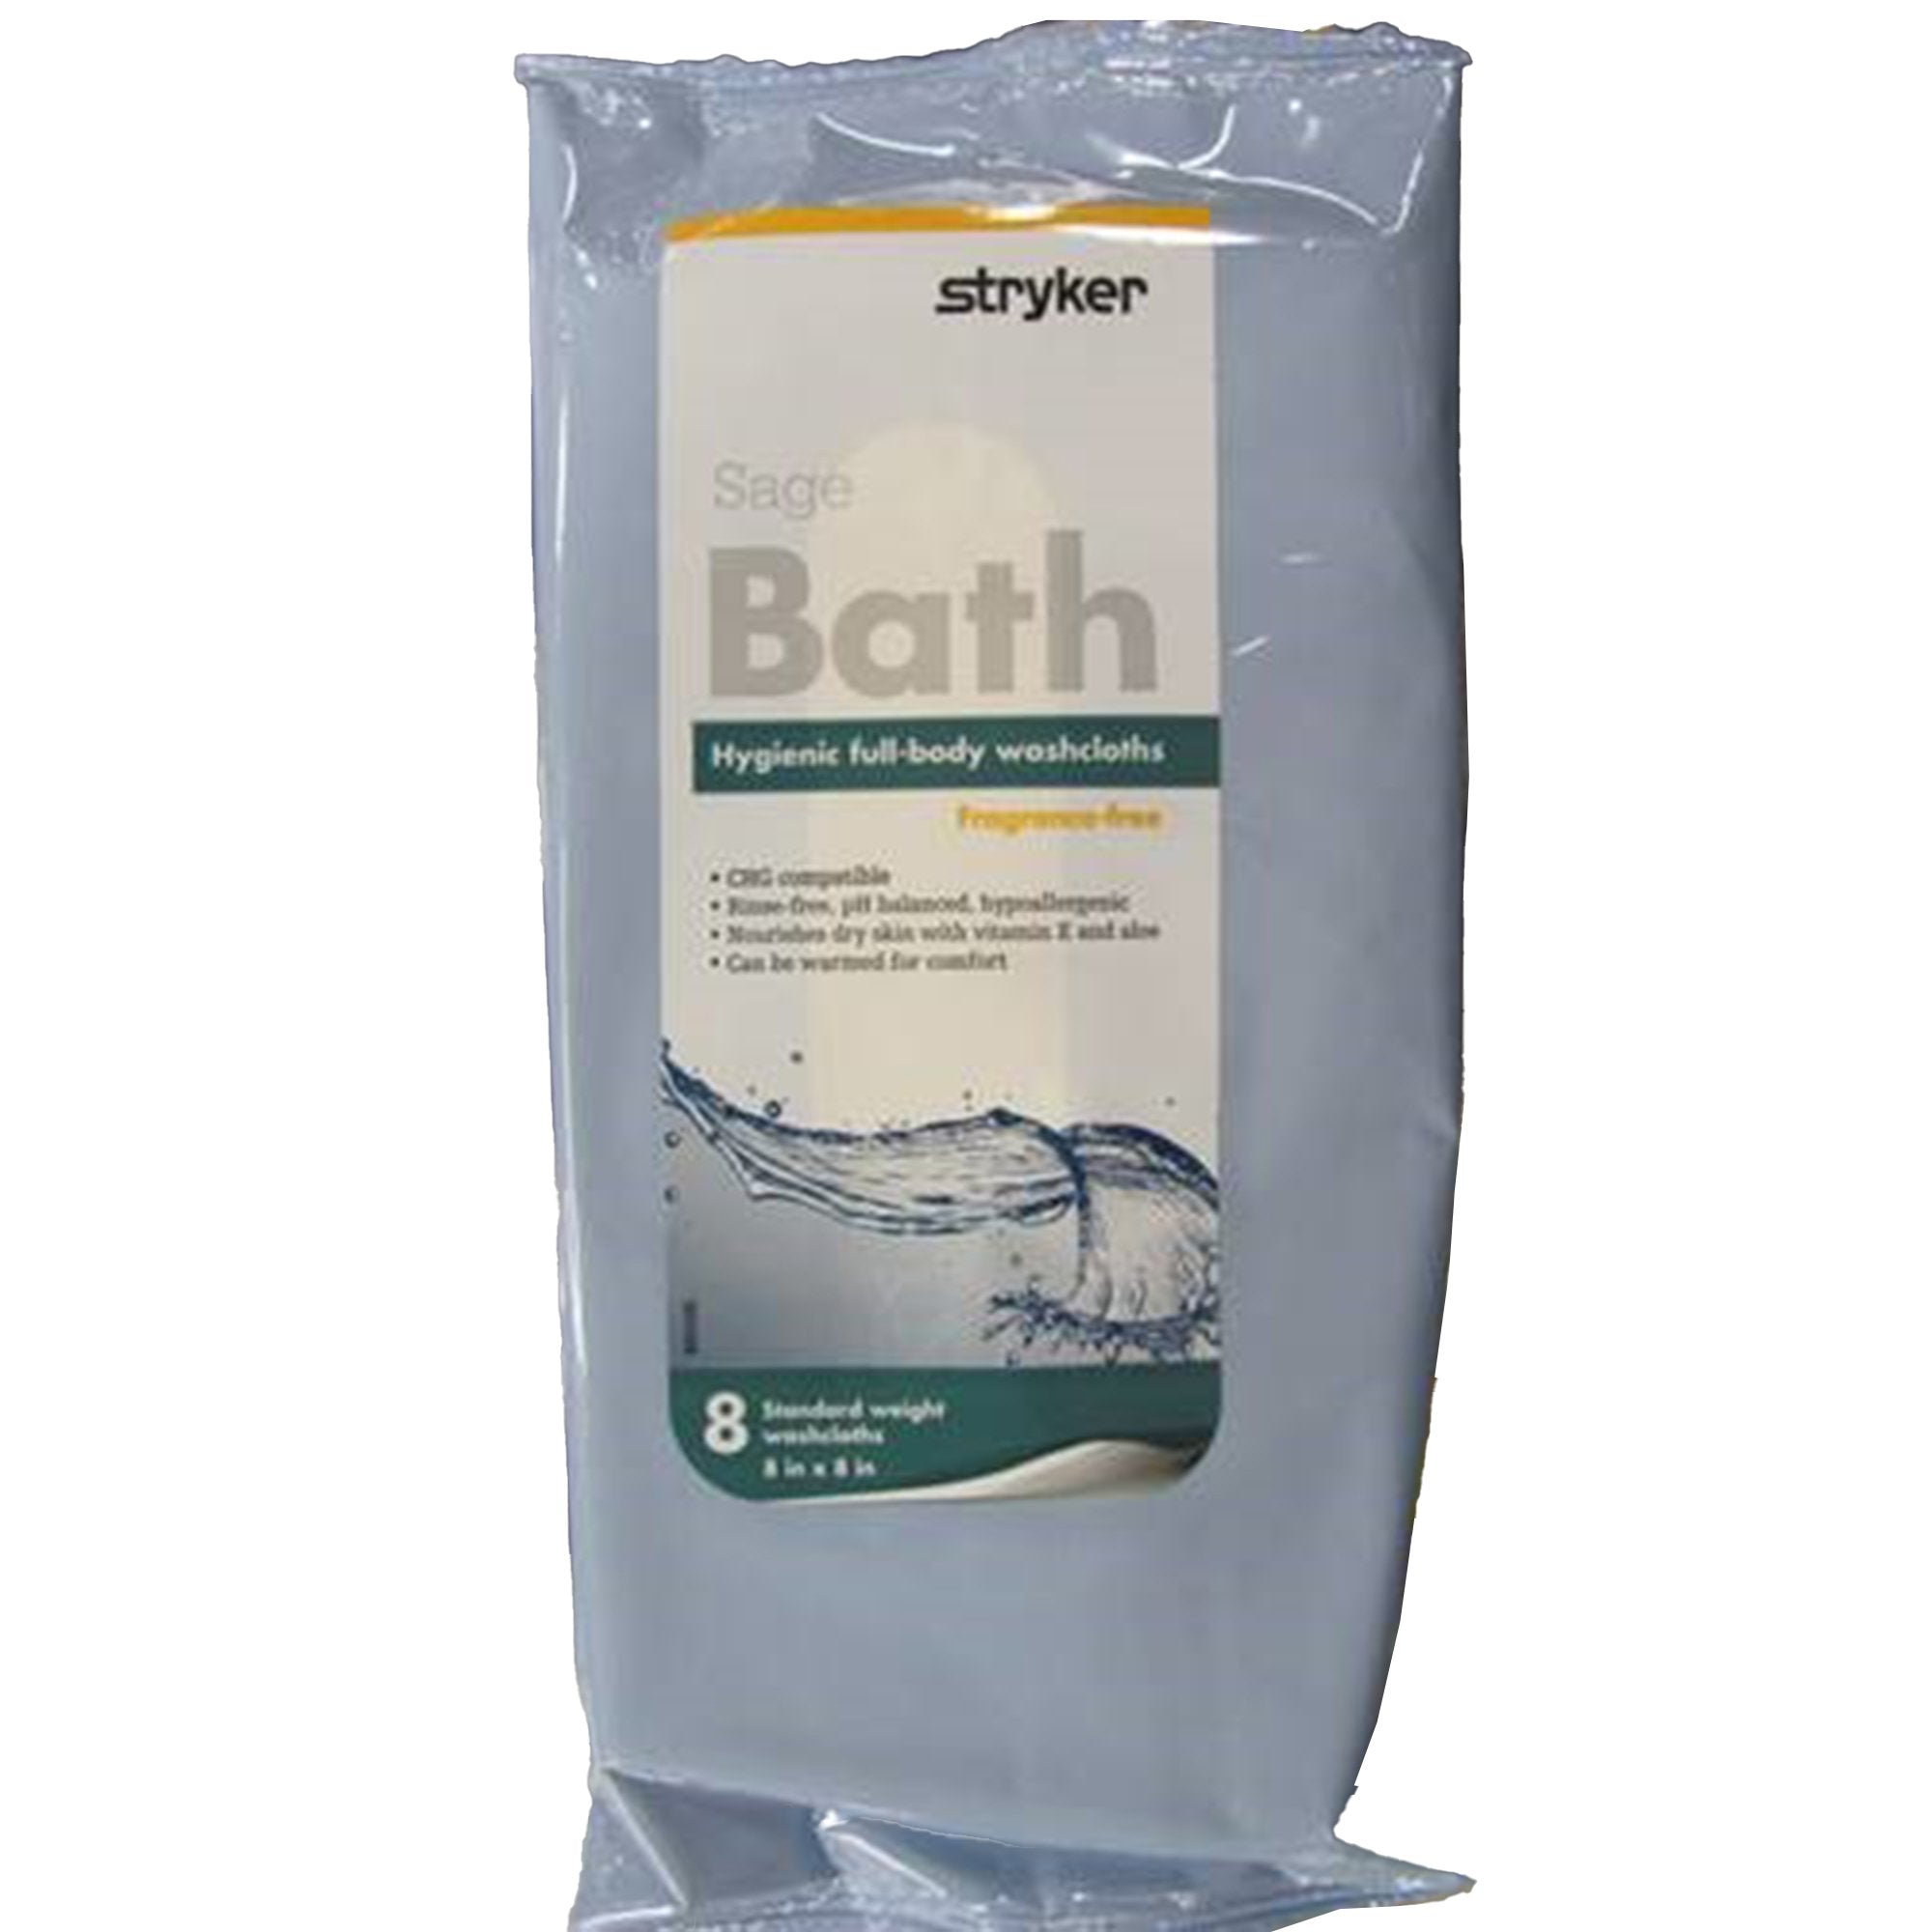 Rinse-Free Bath Wipe Sage Bath Soft Pack Unscented 8 Count